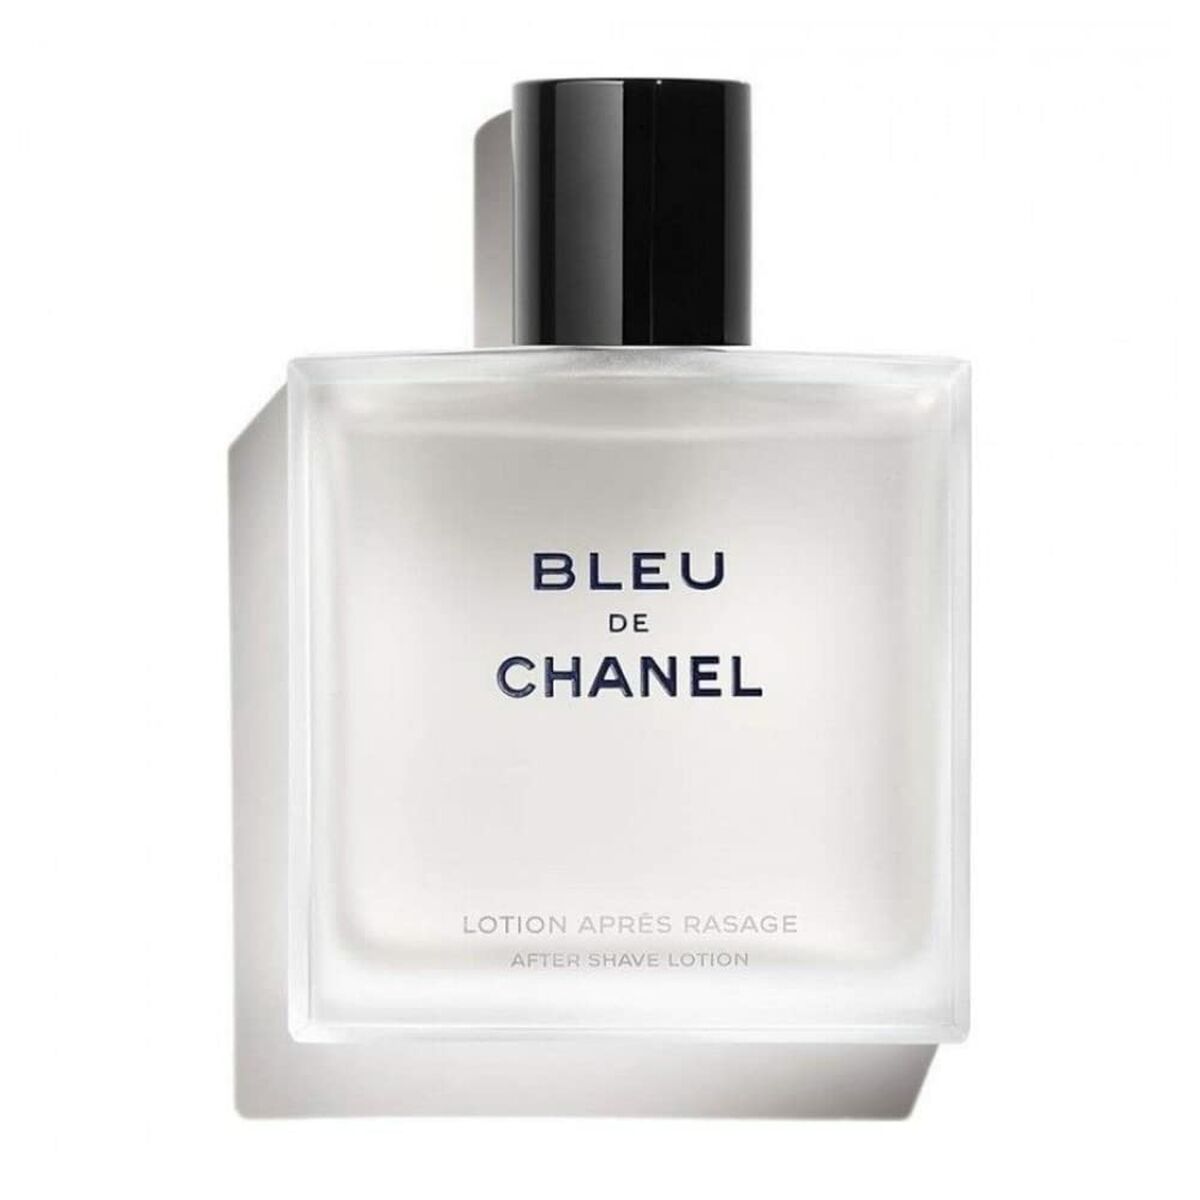 After Shave-Lotion Apres Rasage Flacon Chanel - AWK Flagship